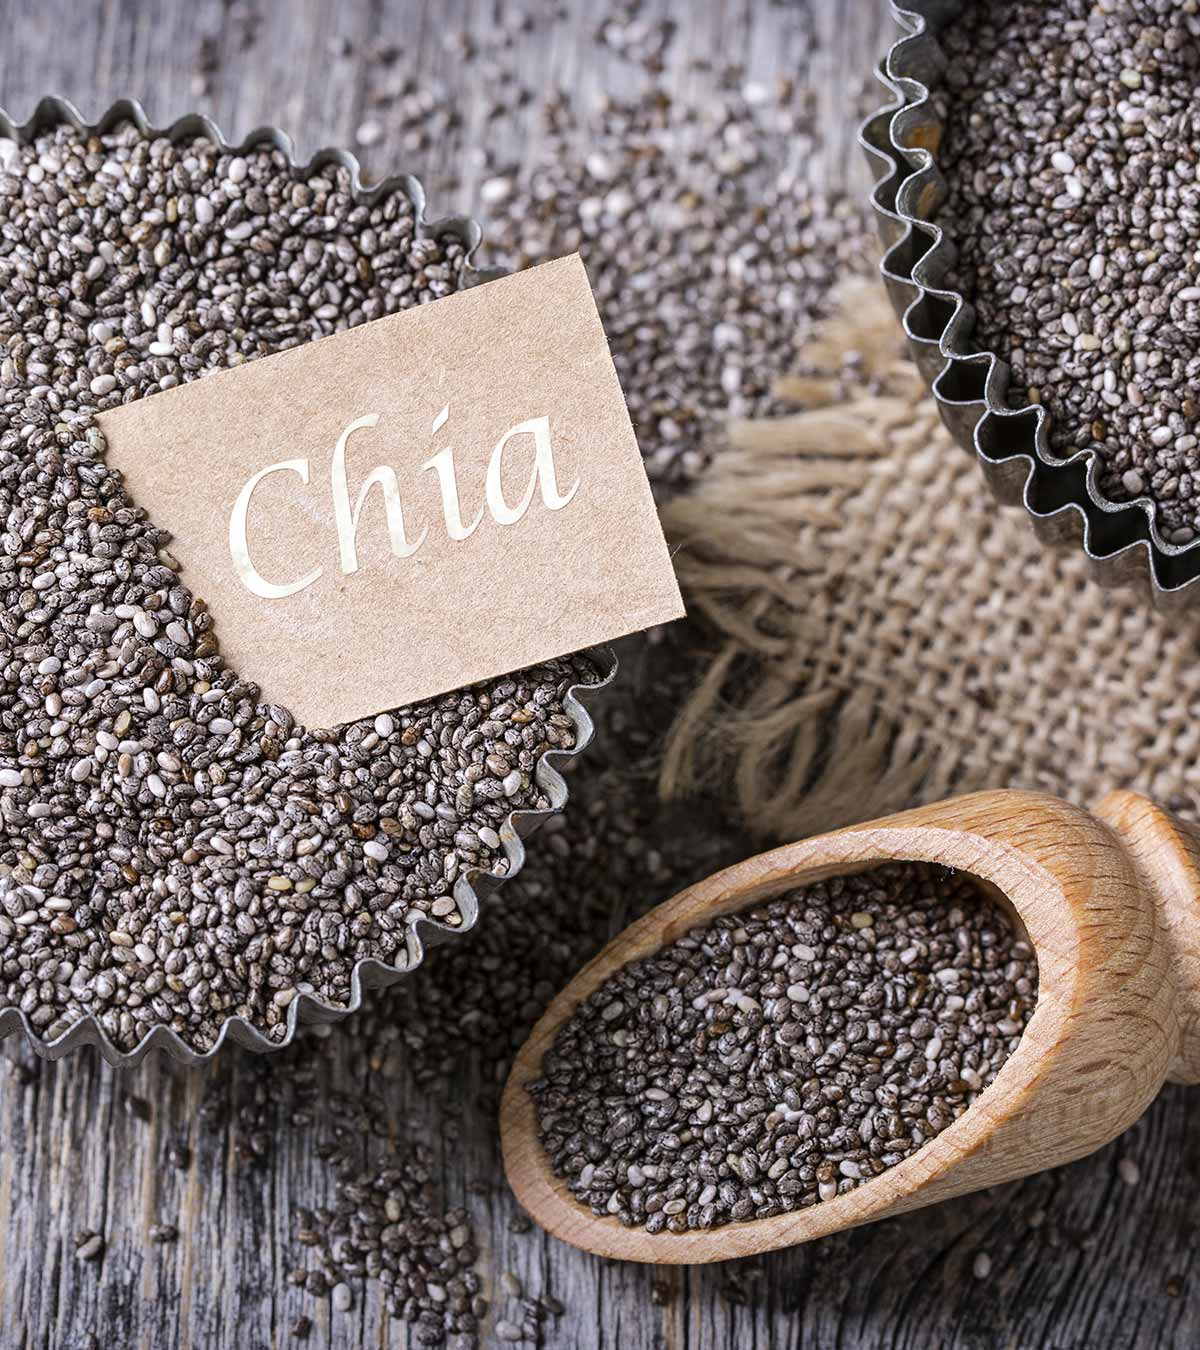 Altitud Año nuevo Sencillez Chia Seeds During Pregnancy: Safety, Benefits And Side Effects